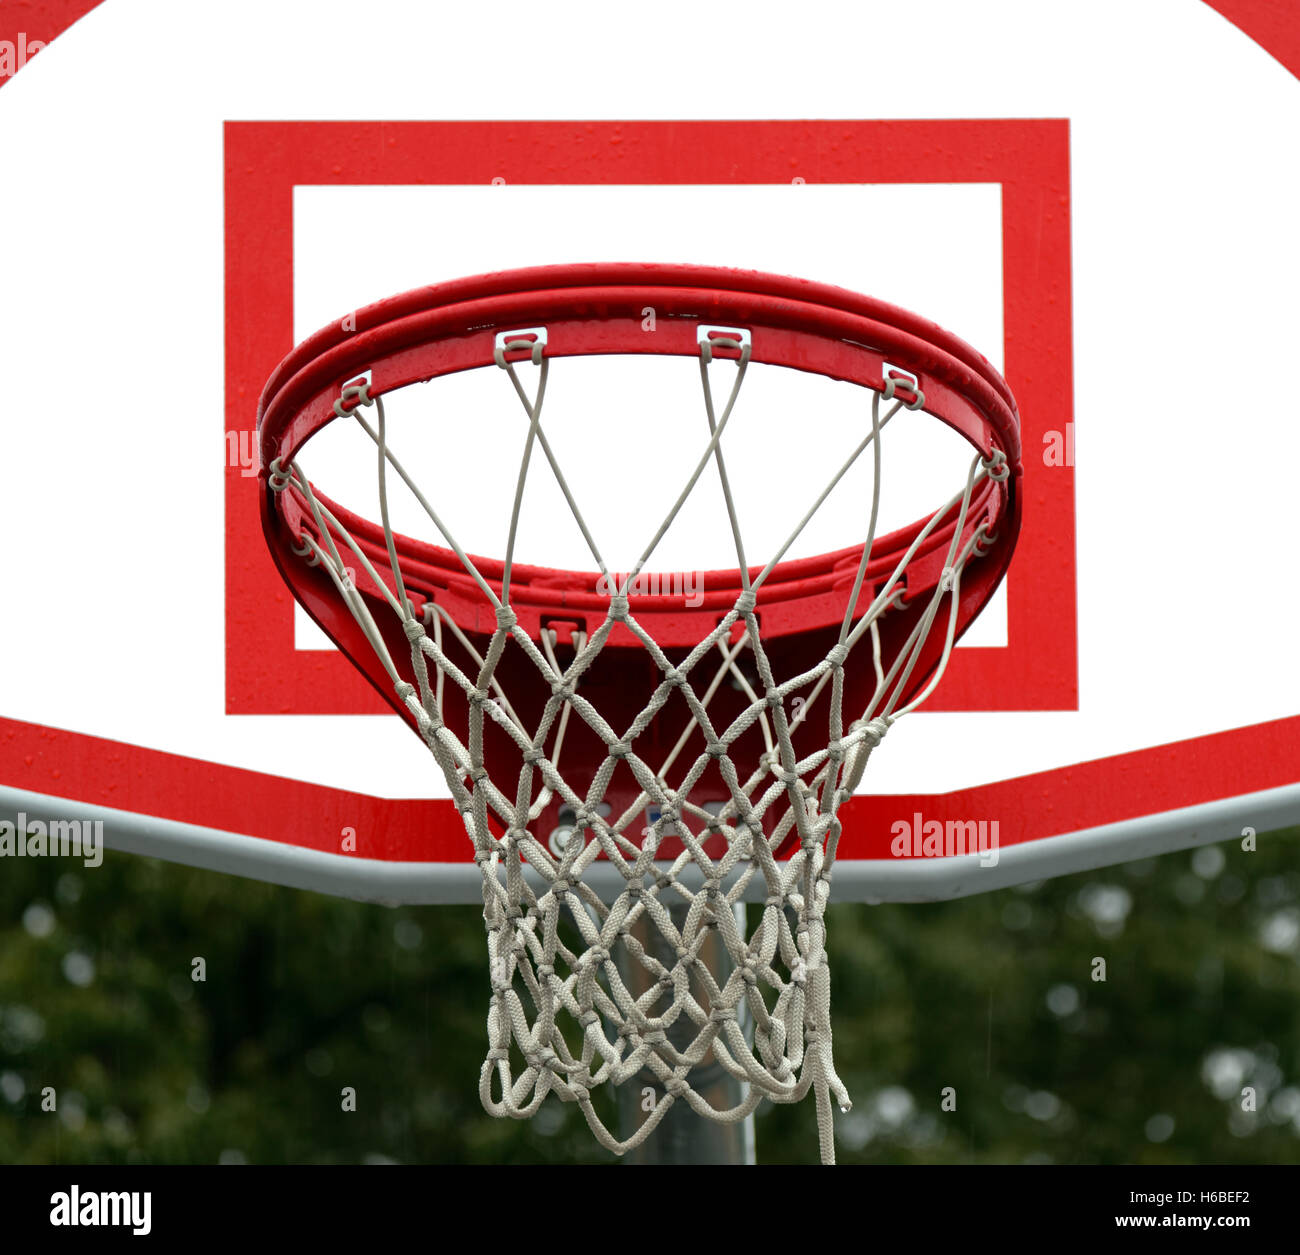 Close-up of new basketball pole, hoop, backboard, and net. Stock Photo